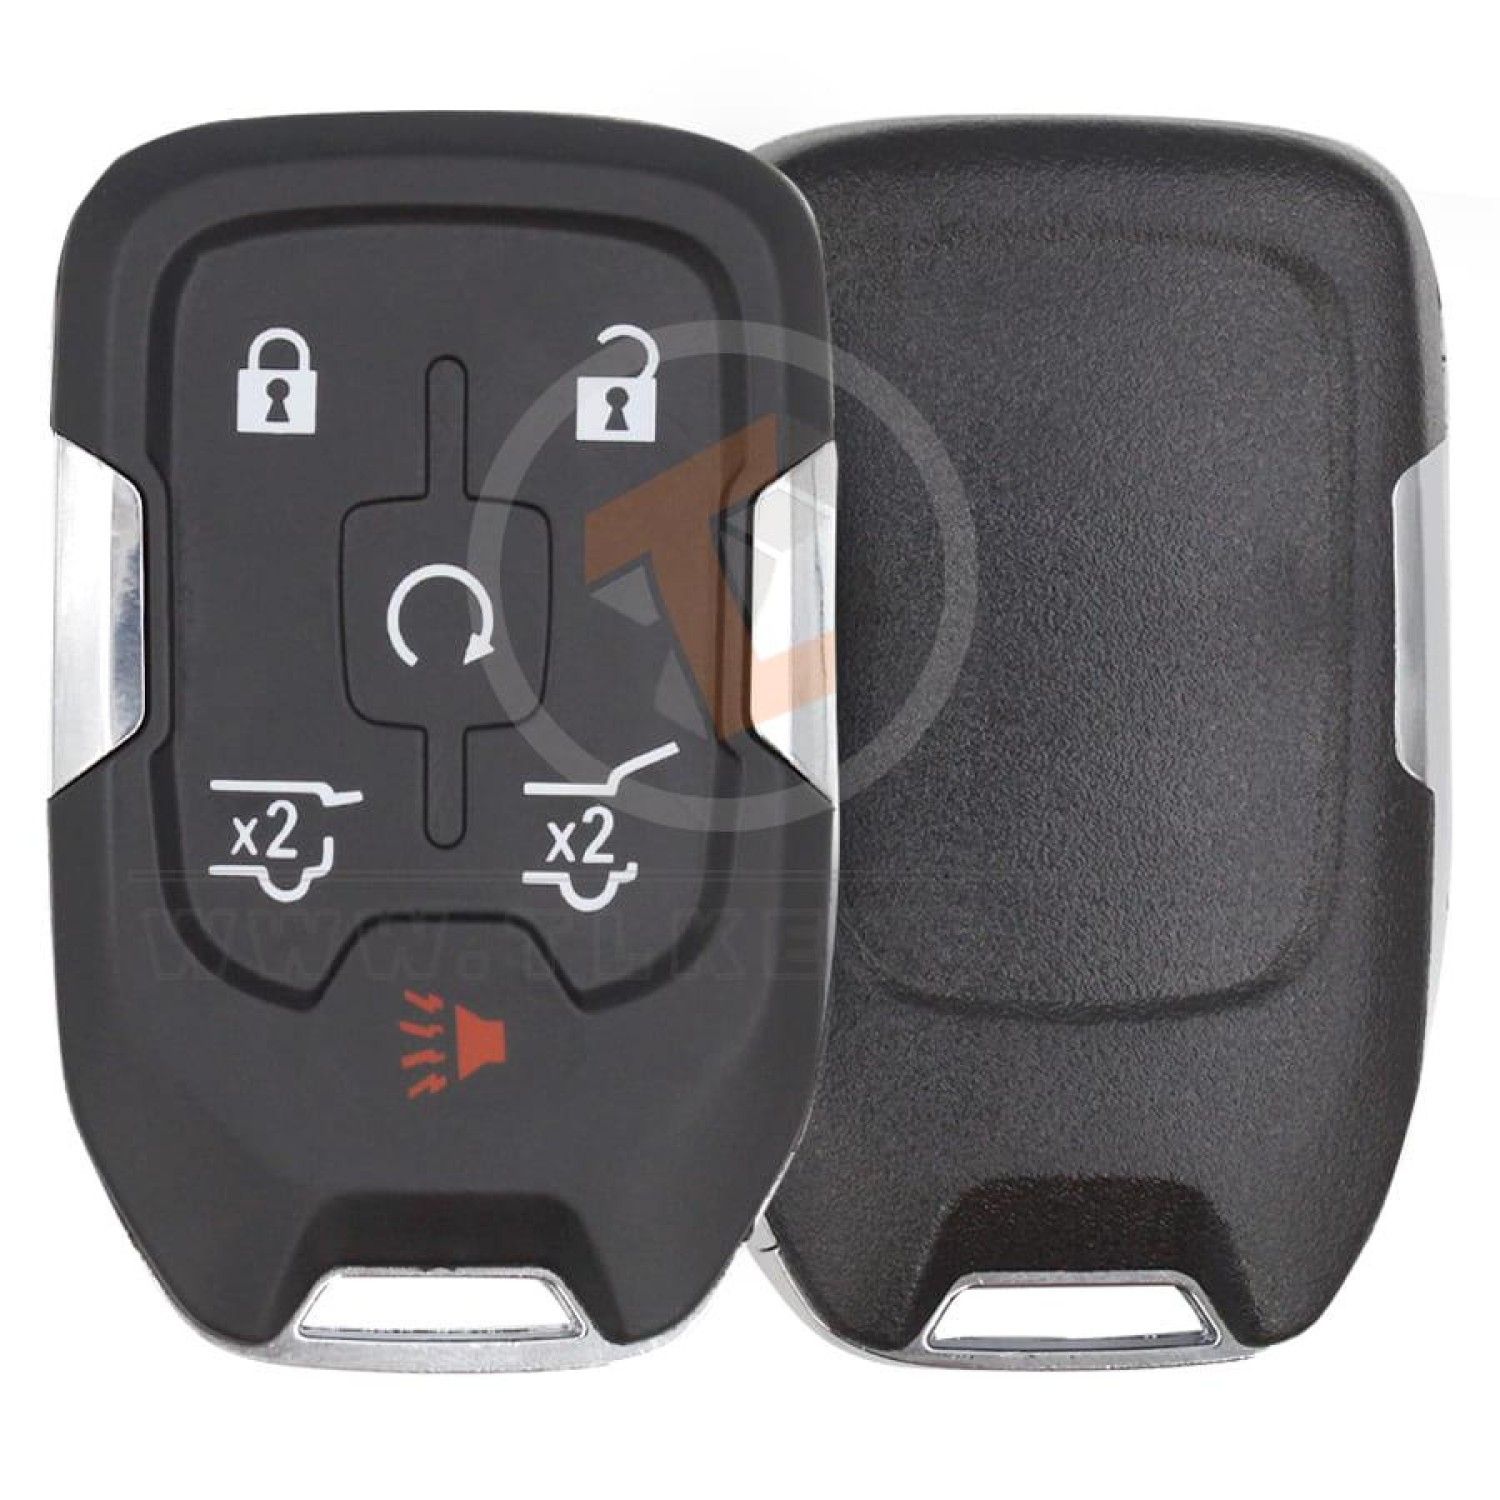 GMC Yukon 2014-2017 Smart Key Remote Shell 6 Buttons Aftermarket Emergency Key/blade Included